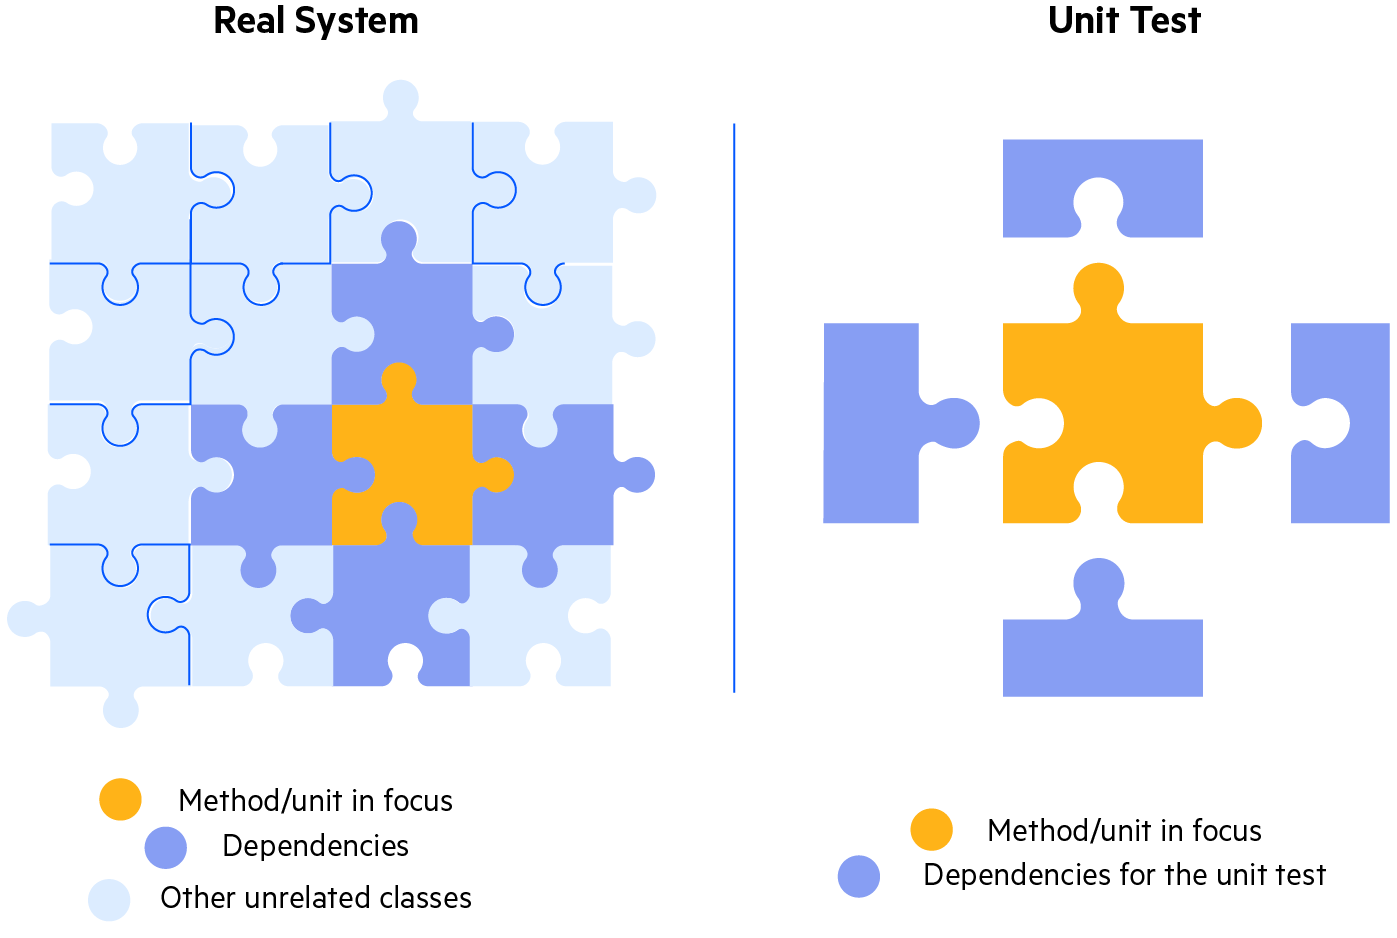 Real system is a puzzle, with a central piece labeled method/unit in focus, the pieces around it dependencies, and the surrounding pieces other unrelated classes. The unit test puzzle has only the method/unit in focus and edge pieces that connect to it are dependencies for the unit test